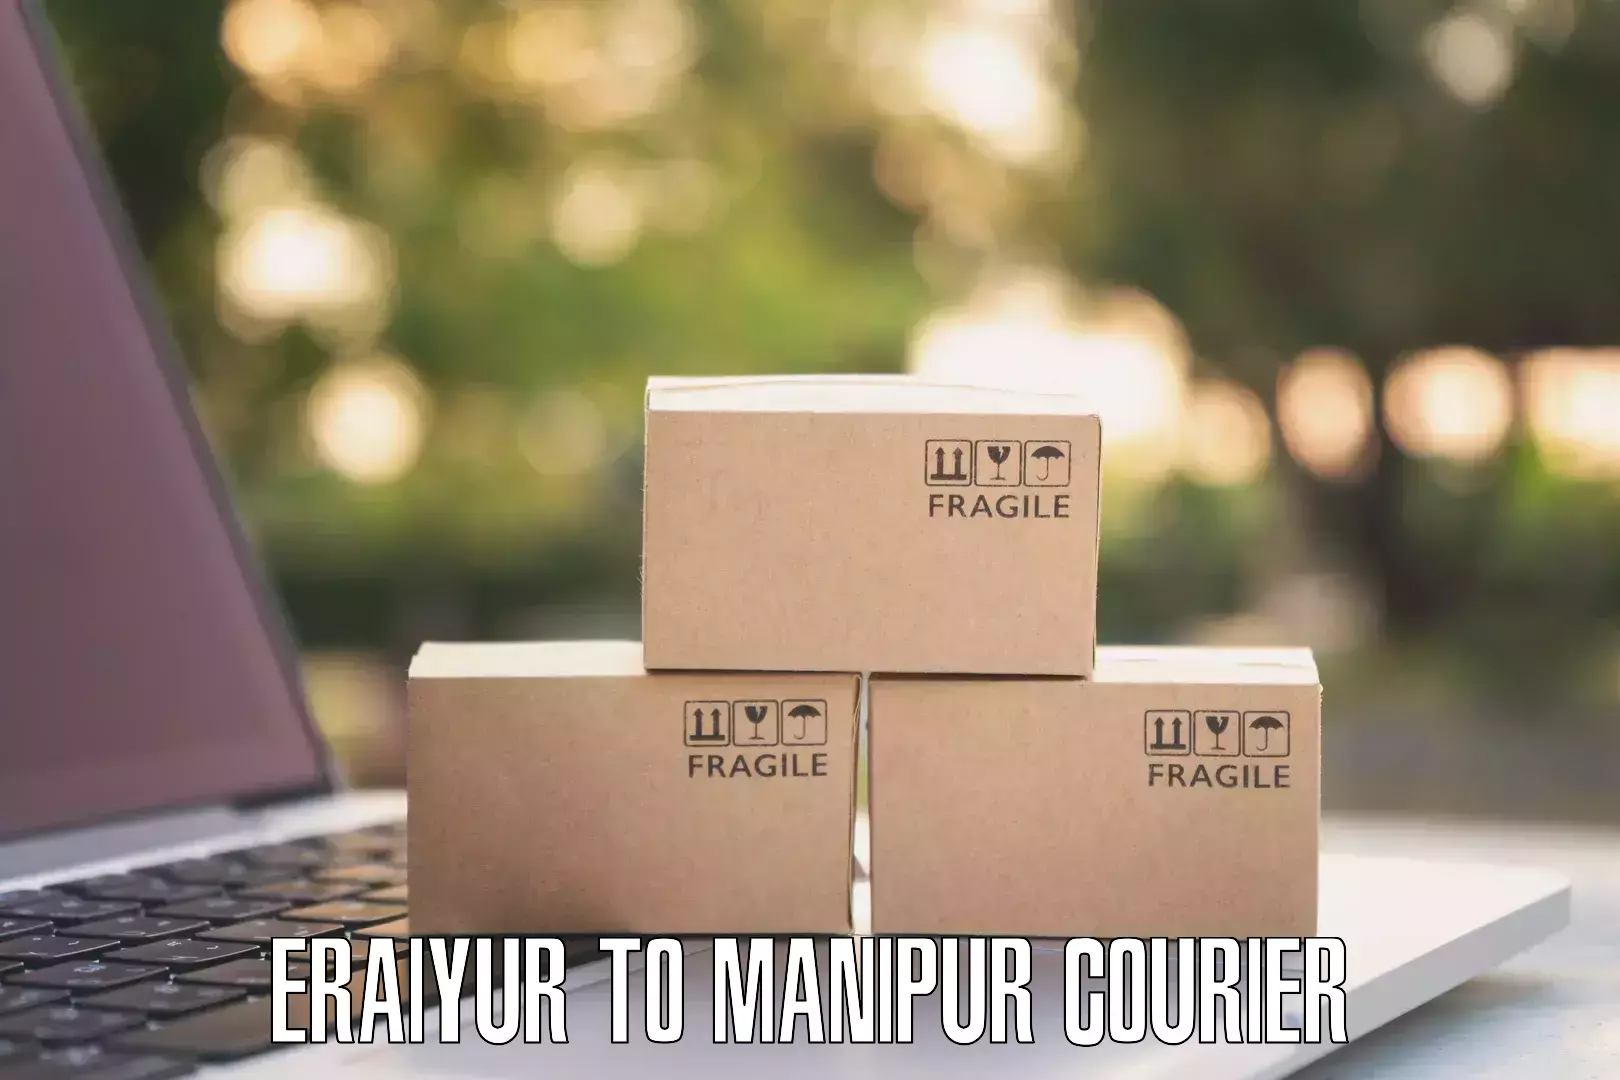 Nationwide courier service Eraiyur to Moirang